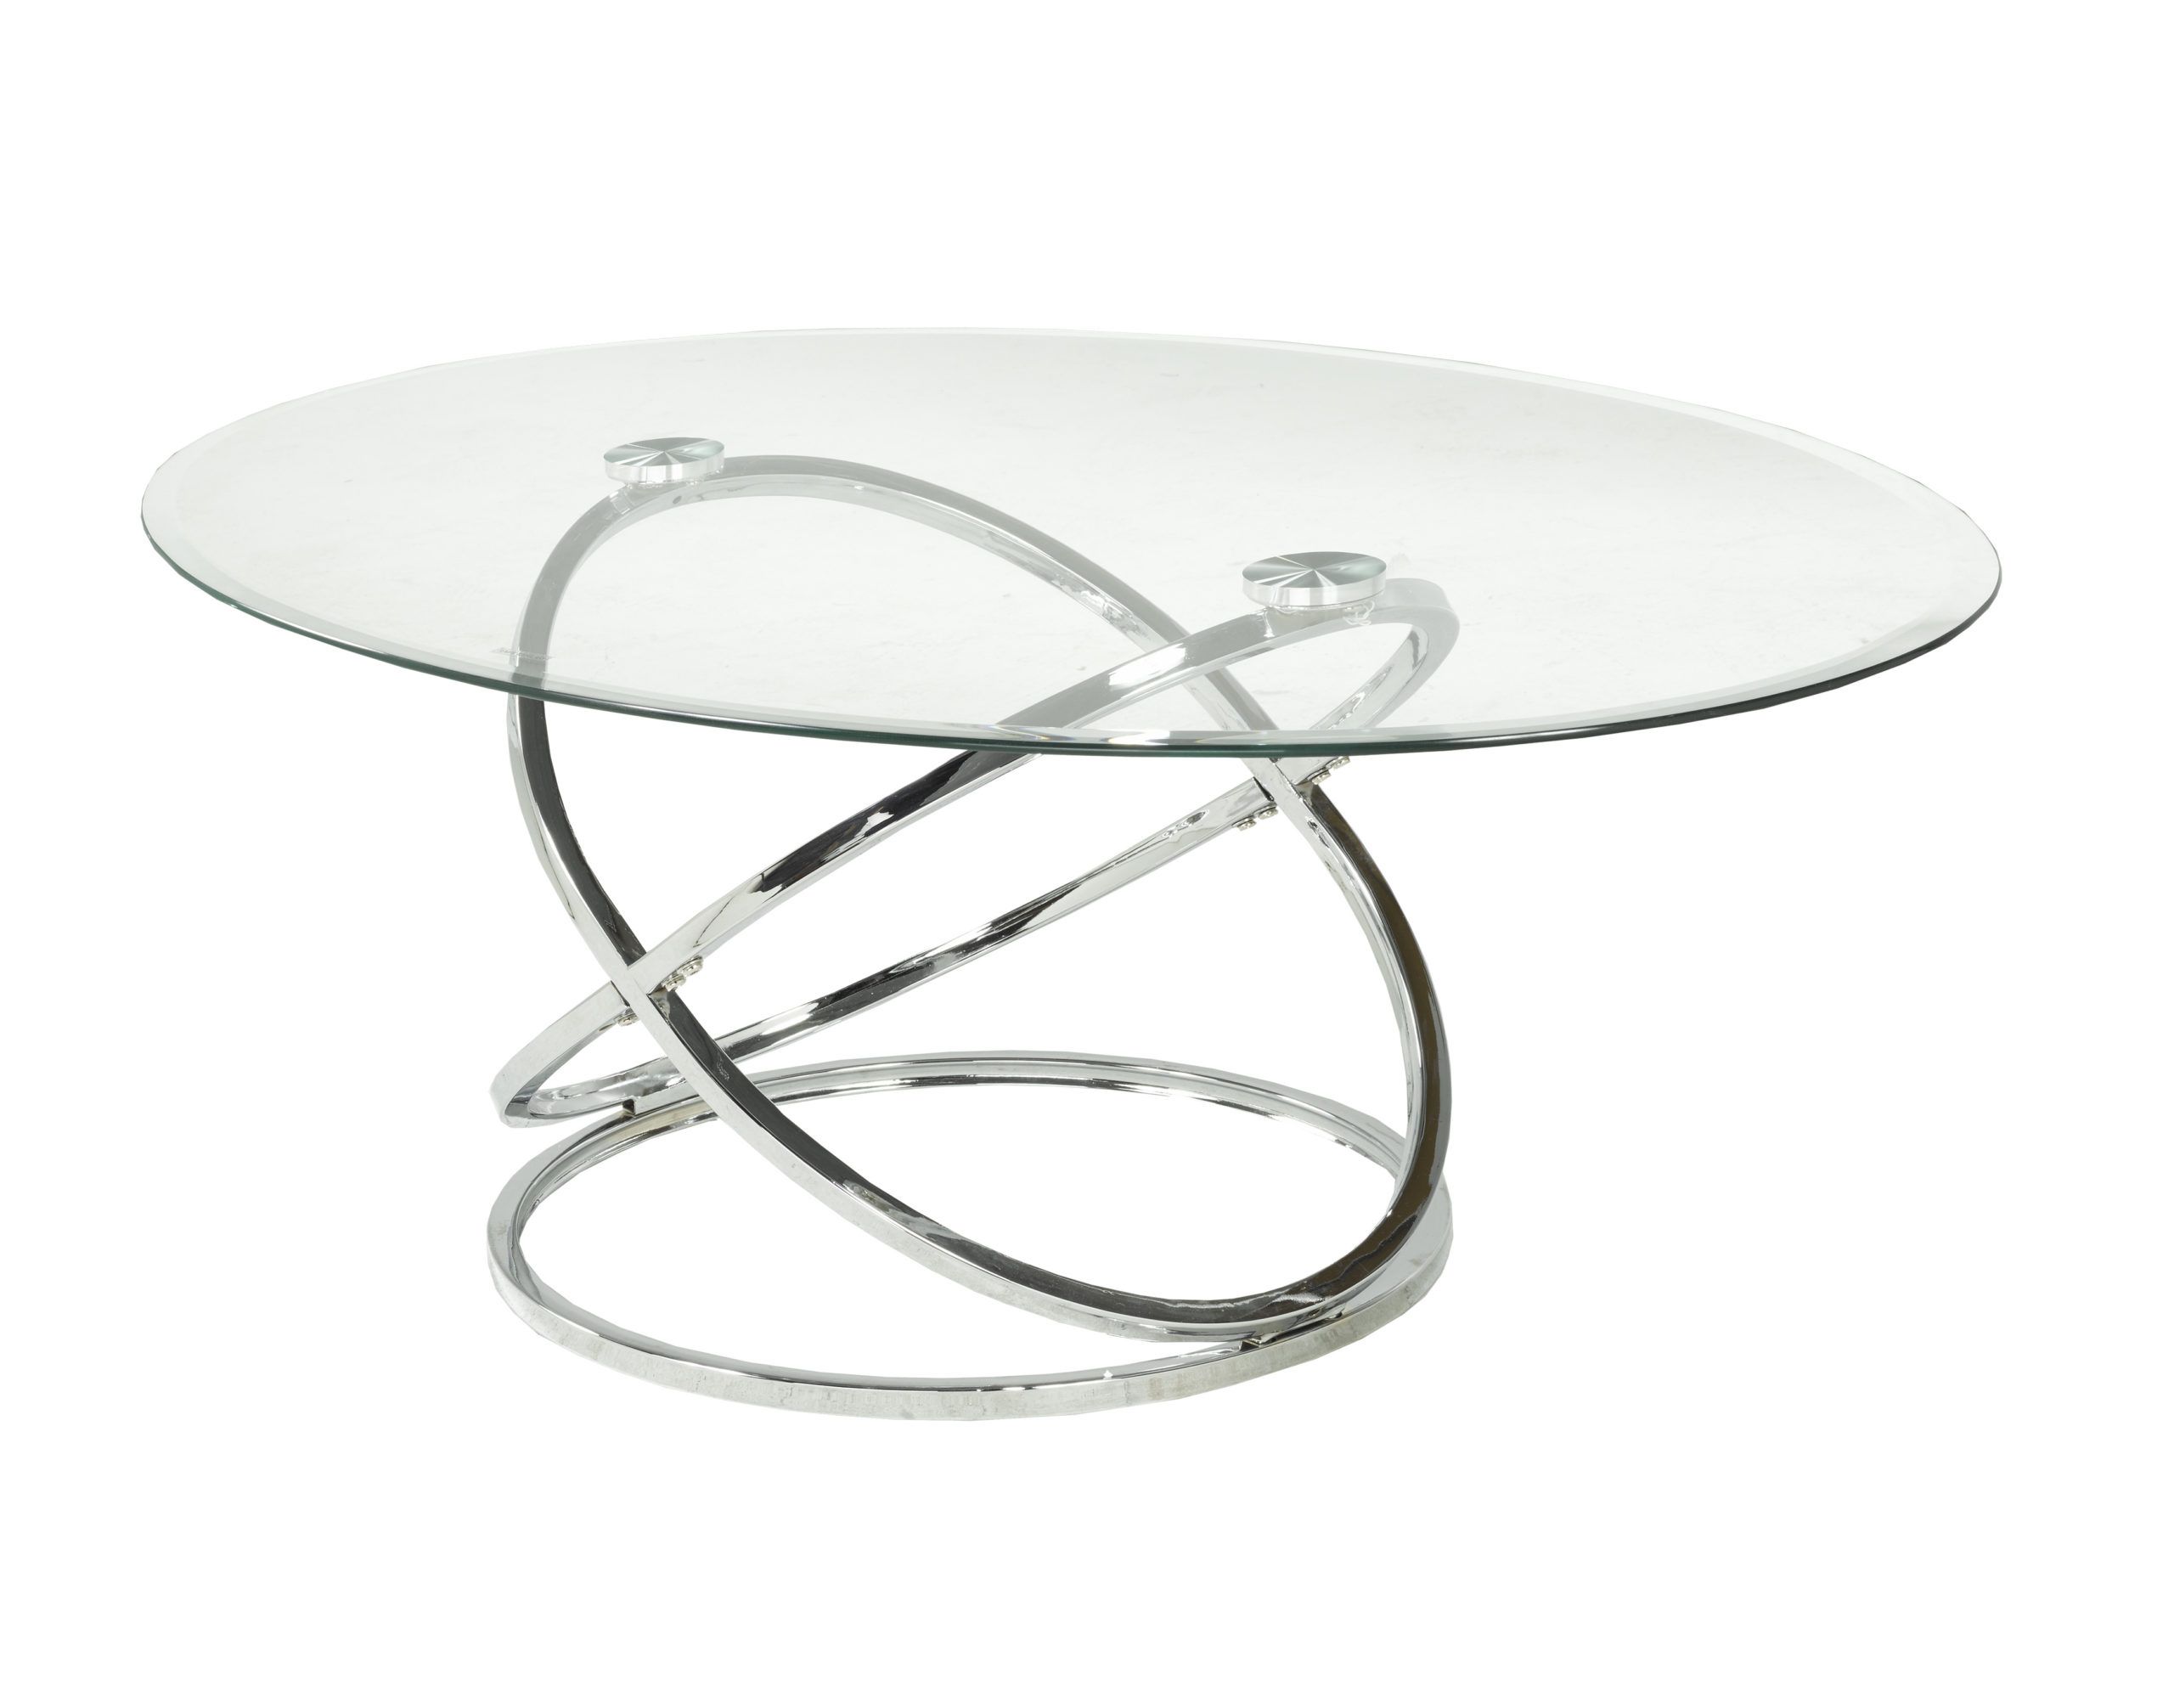 Modern Oval Glass And Chrome Occasional Tables – Arrow Furniture Pertaining To Oval Glass Coffee Tables (View 3 of 15)